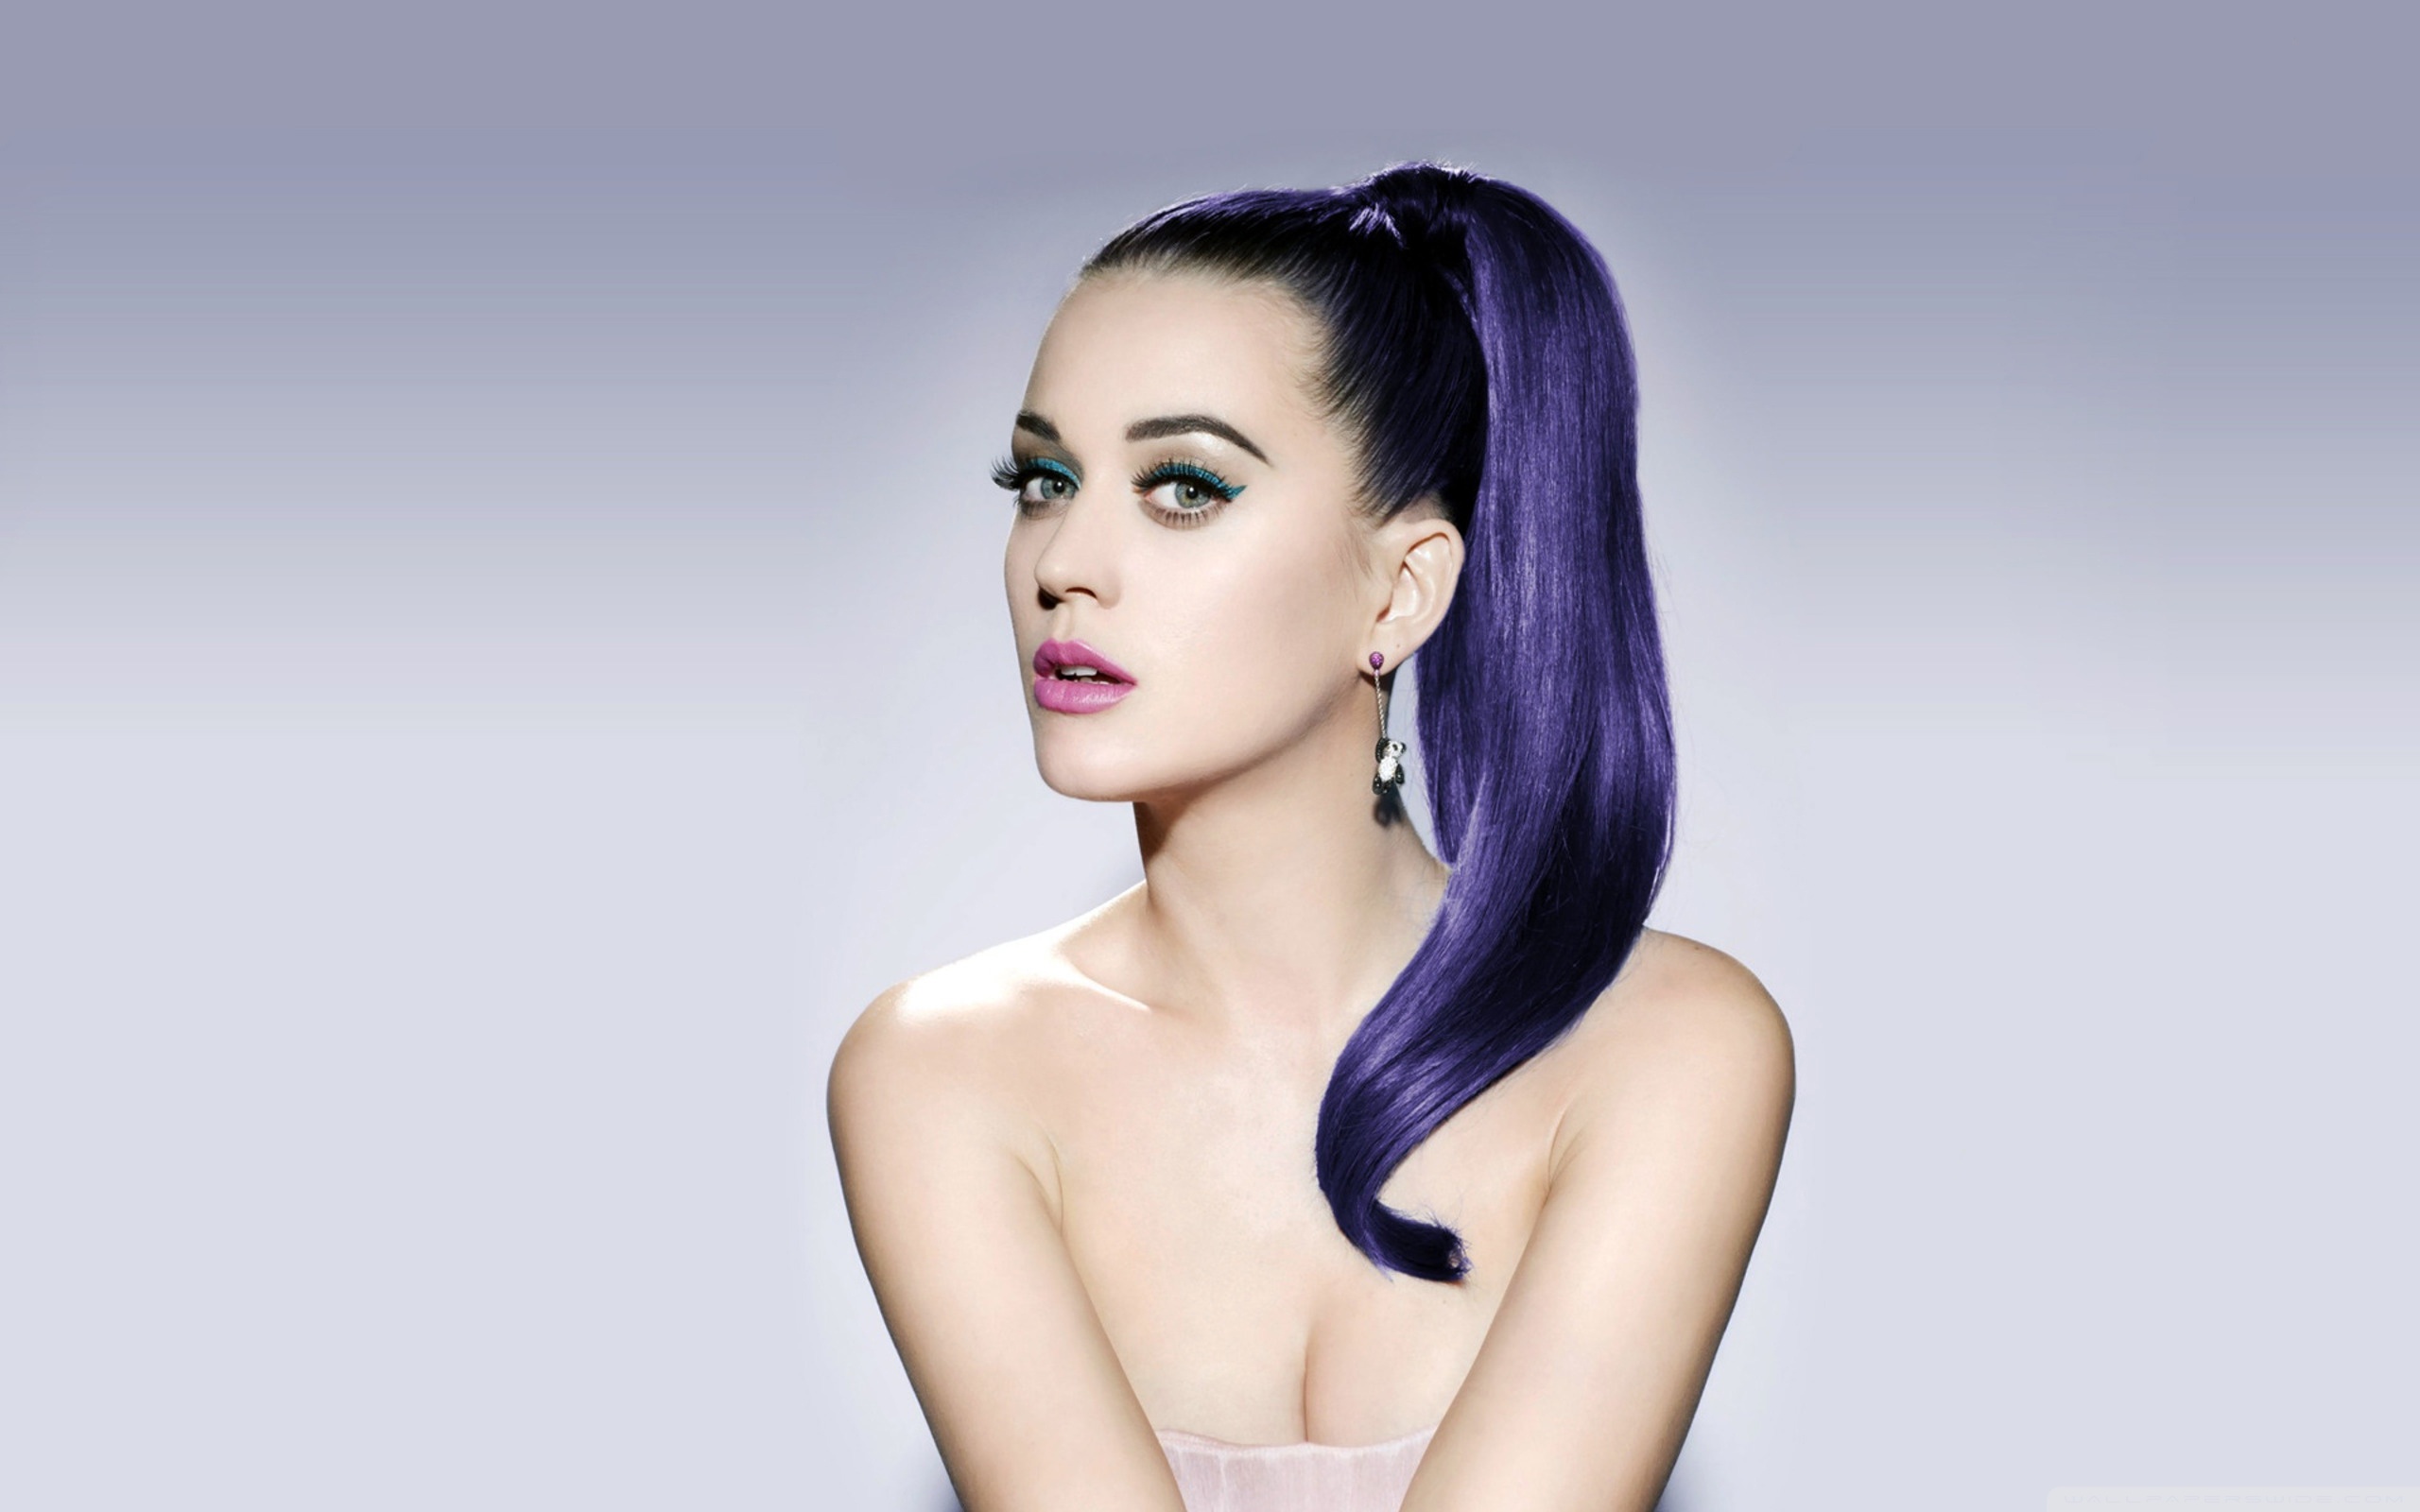 Katy Perry 2012 HD Wide Wallpaper for Widescreen